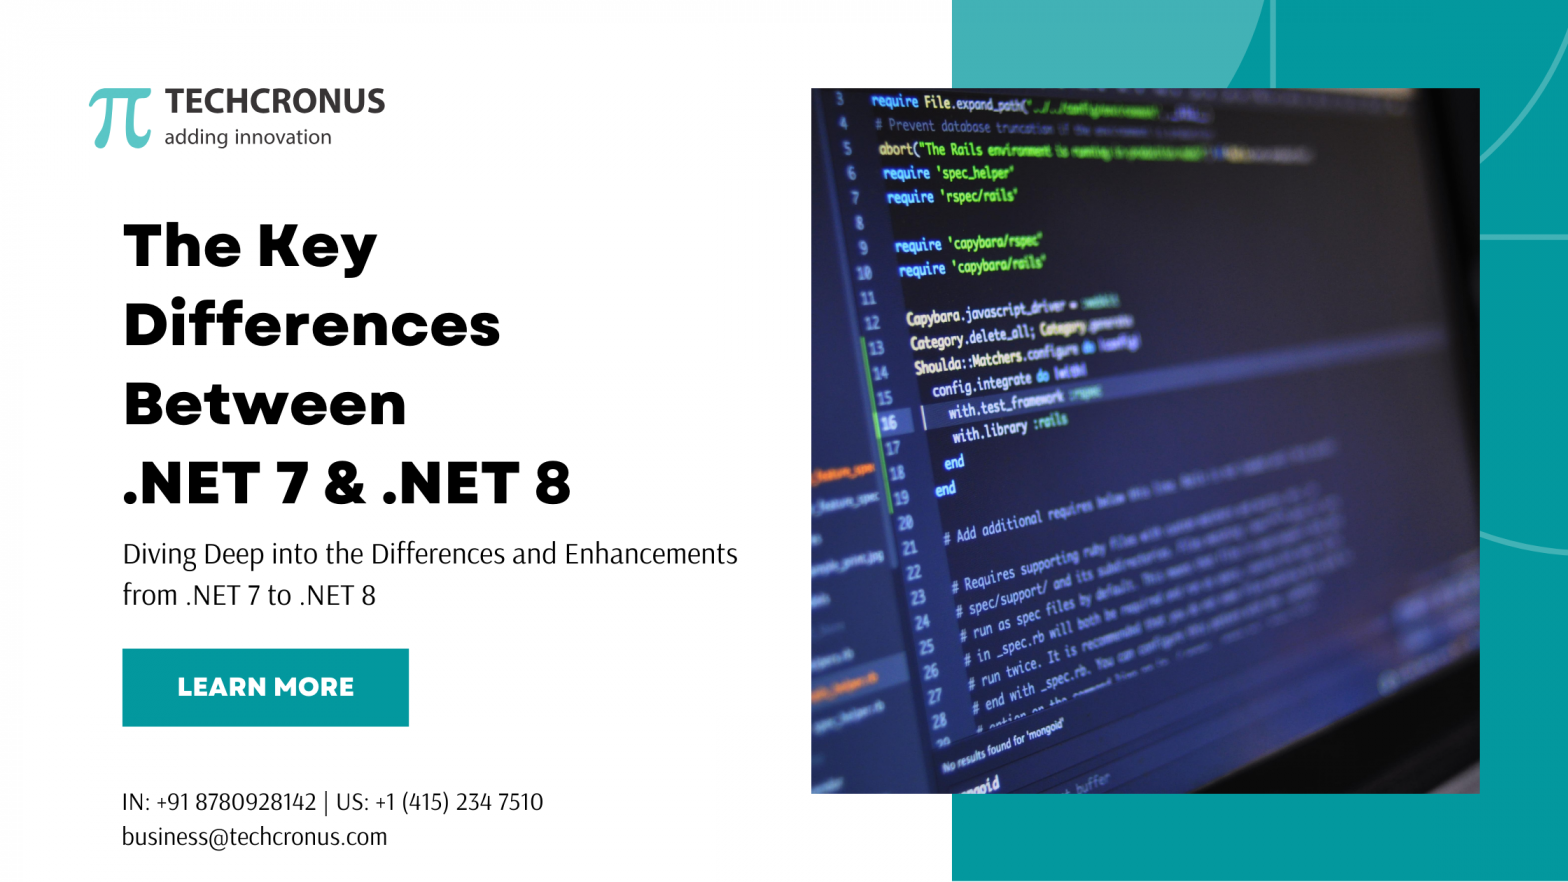 The Key Differences Between .NET 7 & .NET 8